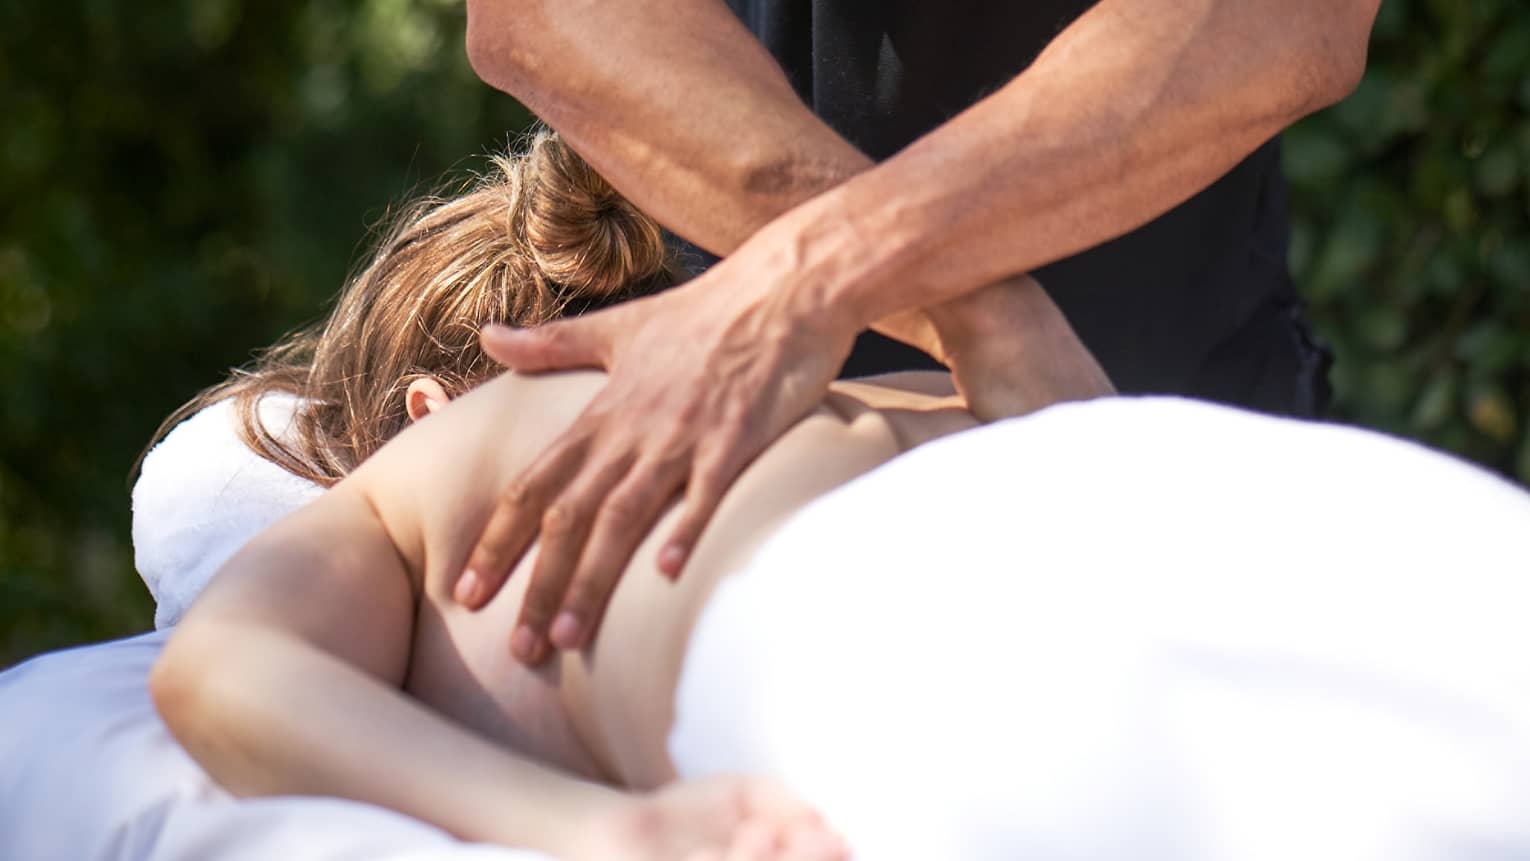 Man crosses hands over woman's back as she lays on outdoor massage table